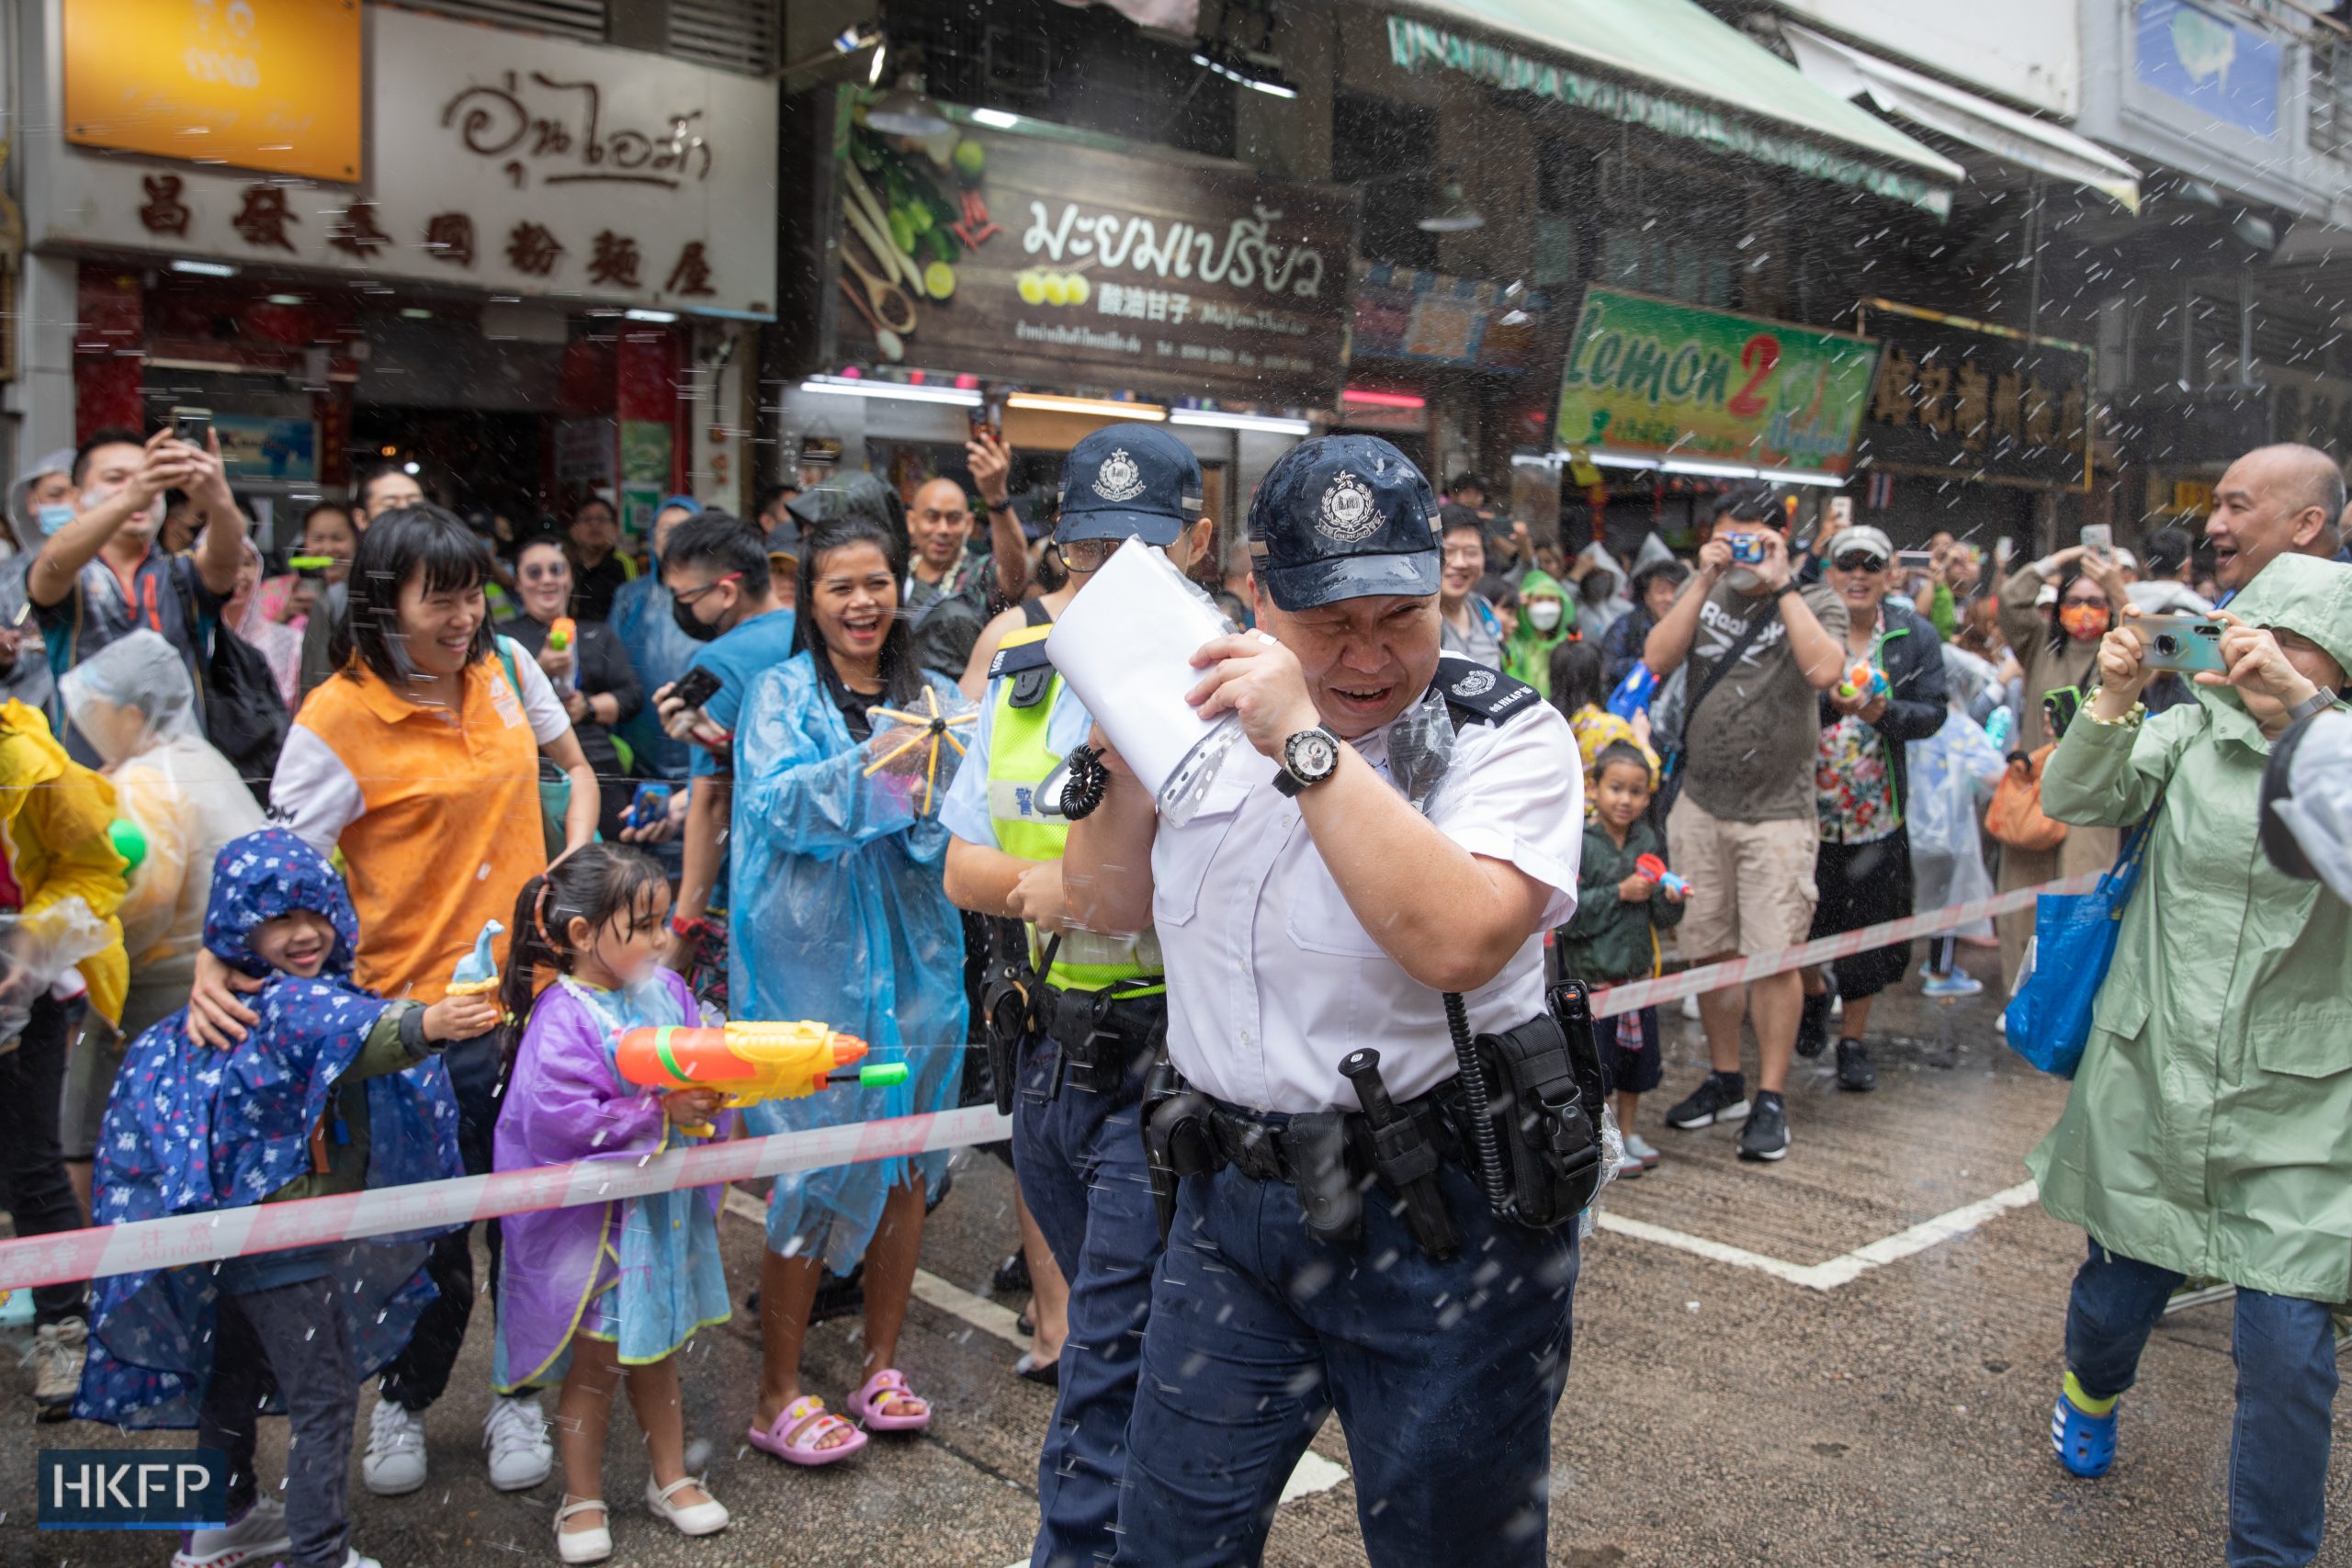 Citizens spray water on police officers during Songkran Festival in Kowloon City on April 9, 2023. Four days later, 2 men were arrested and accused of “assaulting police officers”. Photo: Kyle Lam/HKFP.